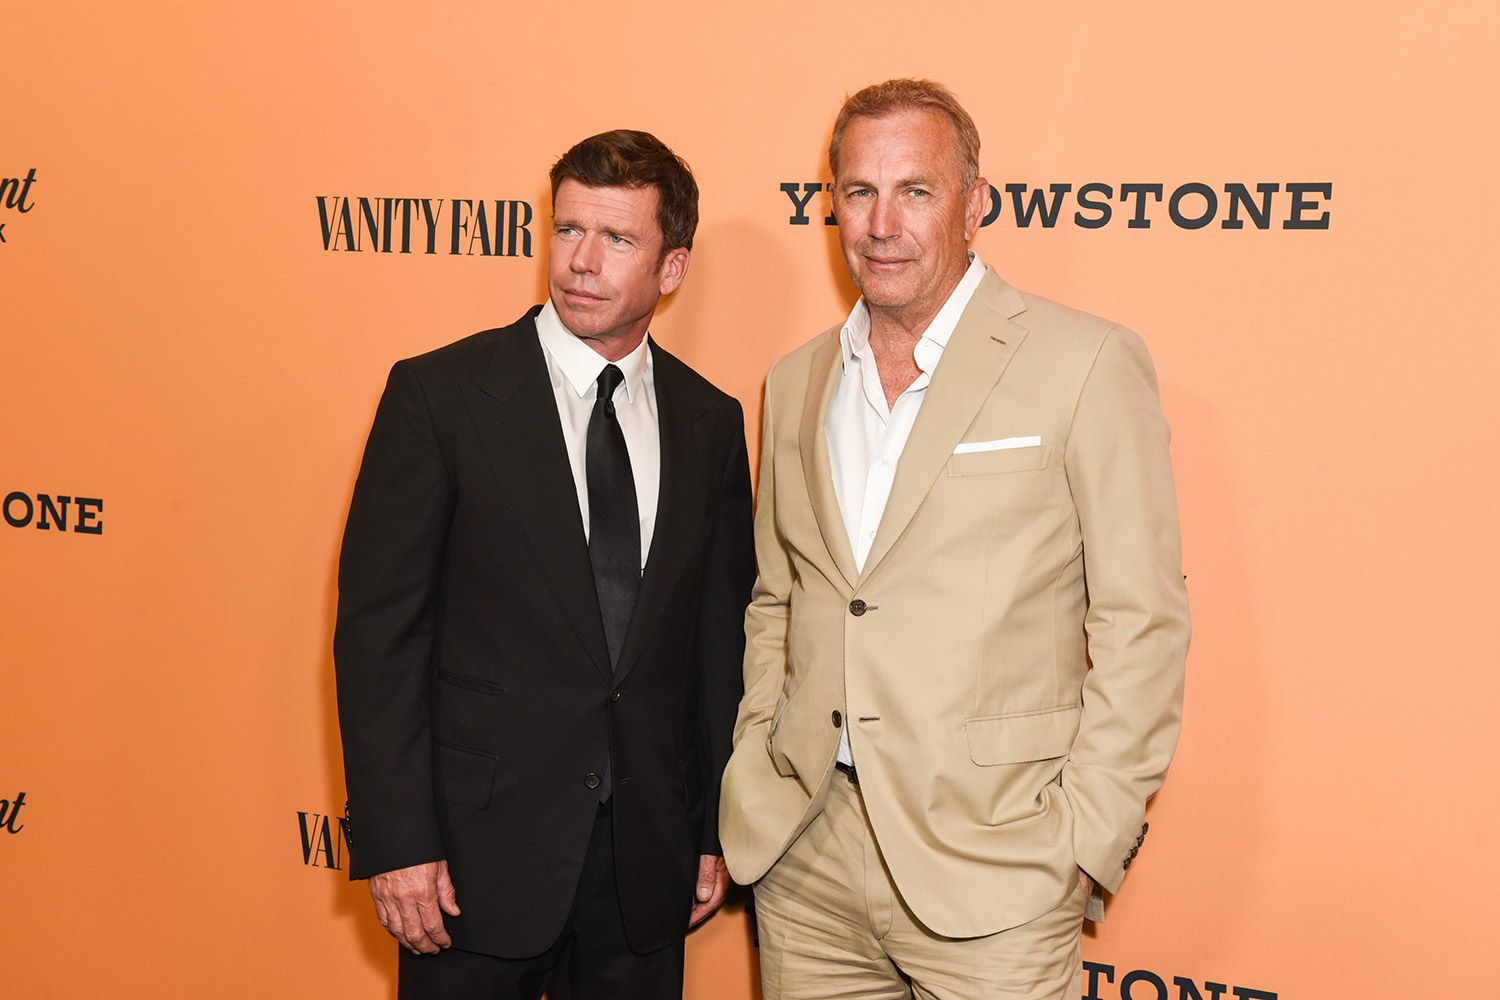 Taylor Sheridan and Kevin Costner attend the premiere of Paramount Pictures' "Yellowstone" at Paramount Studios on June 11, 2018